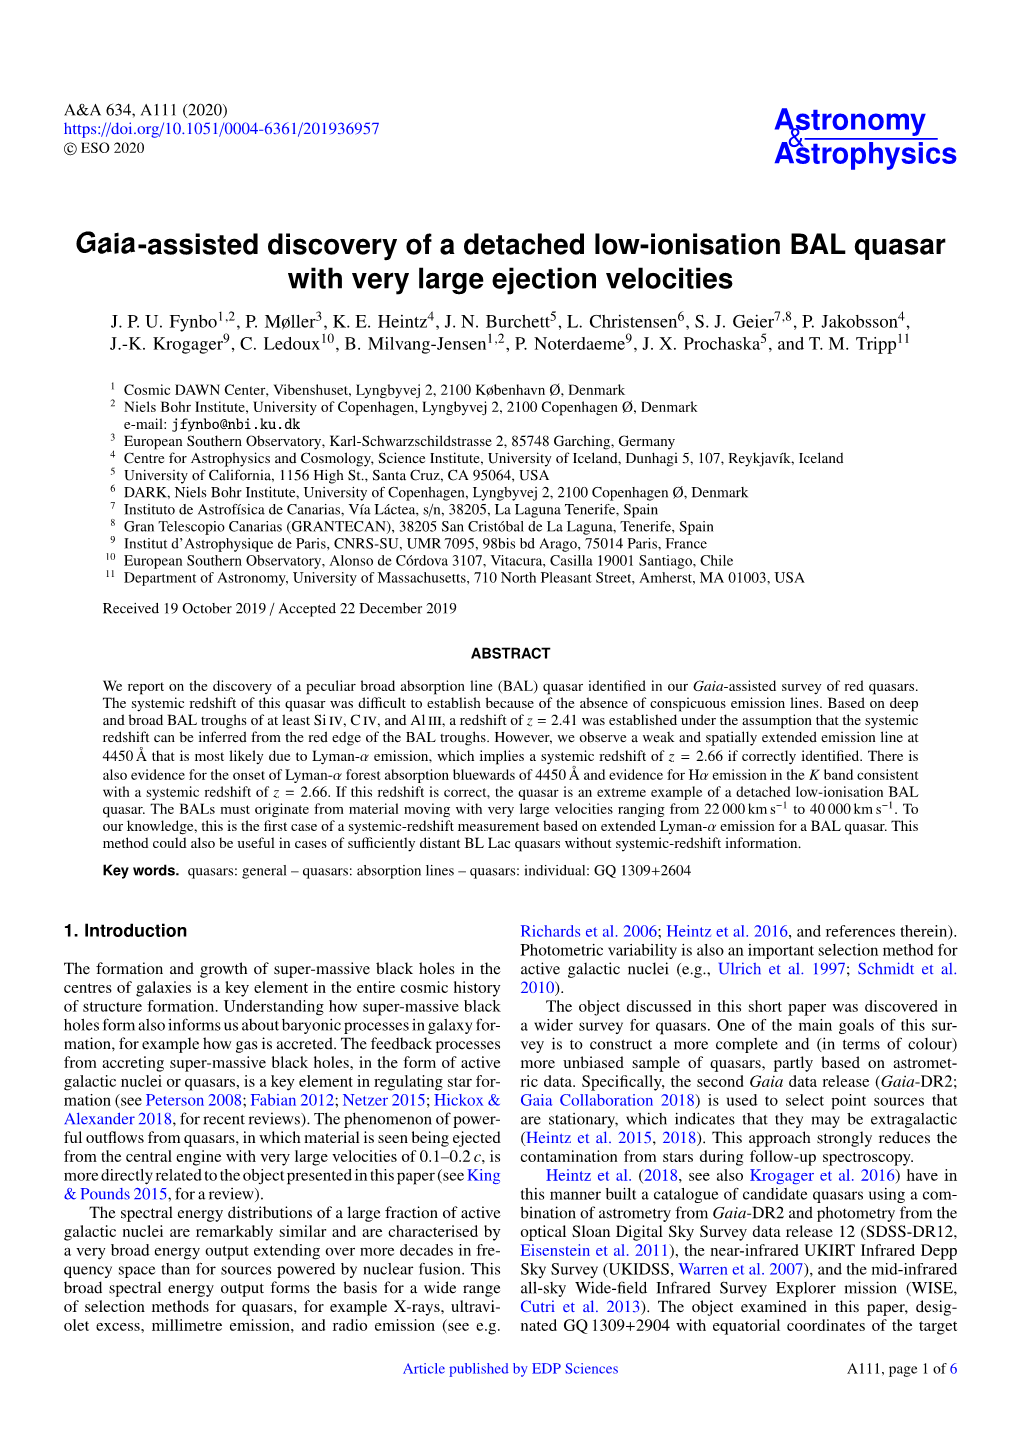 Gaia-Assisted Discovery of a Detached Low-Ionisation BAL Quasar with Very Large Ejection Velocities J